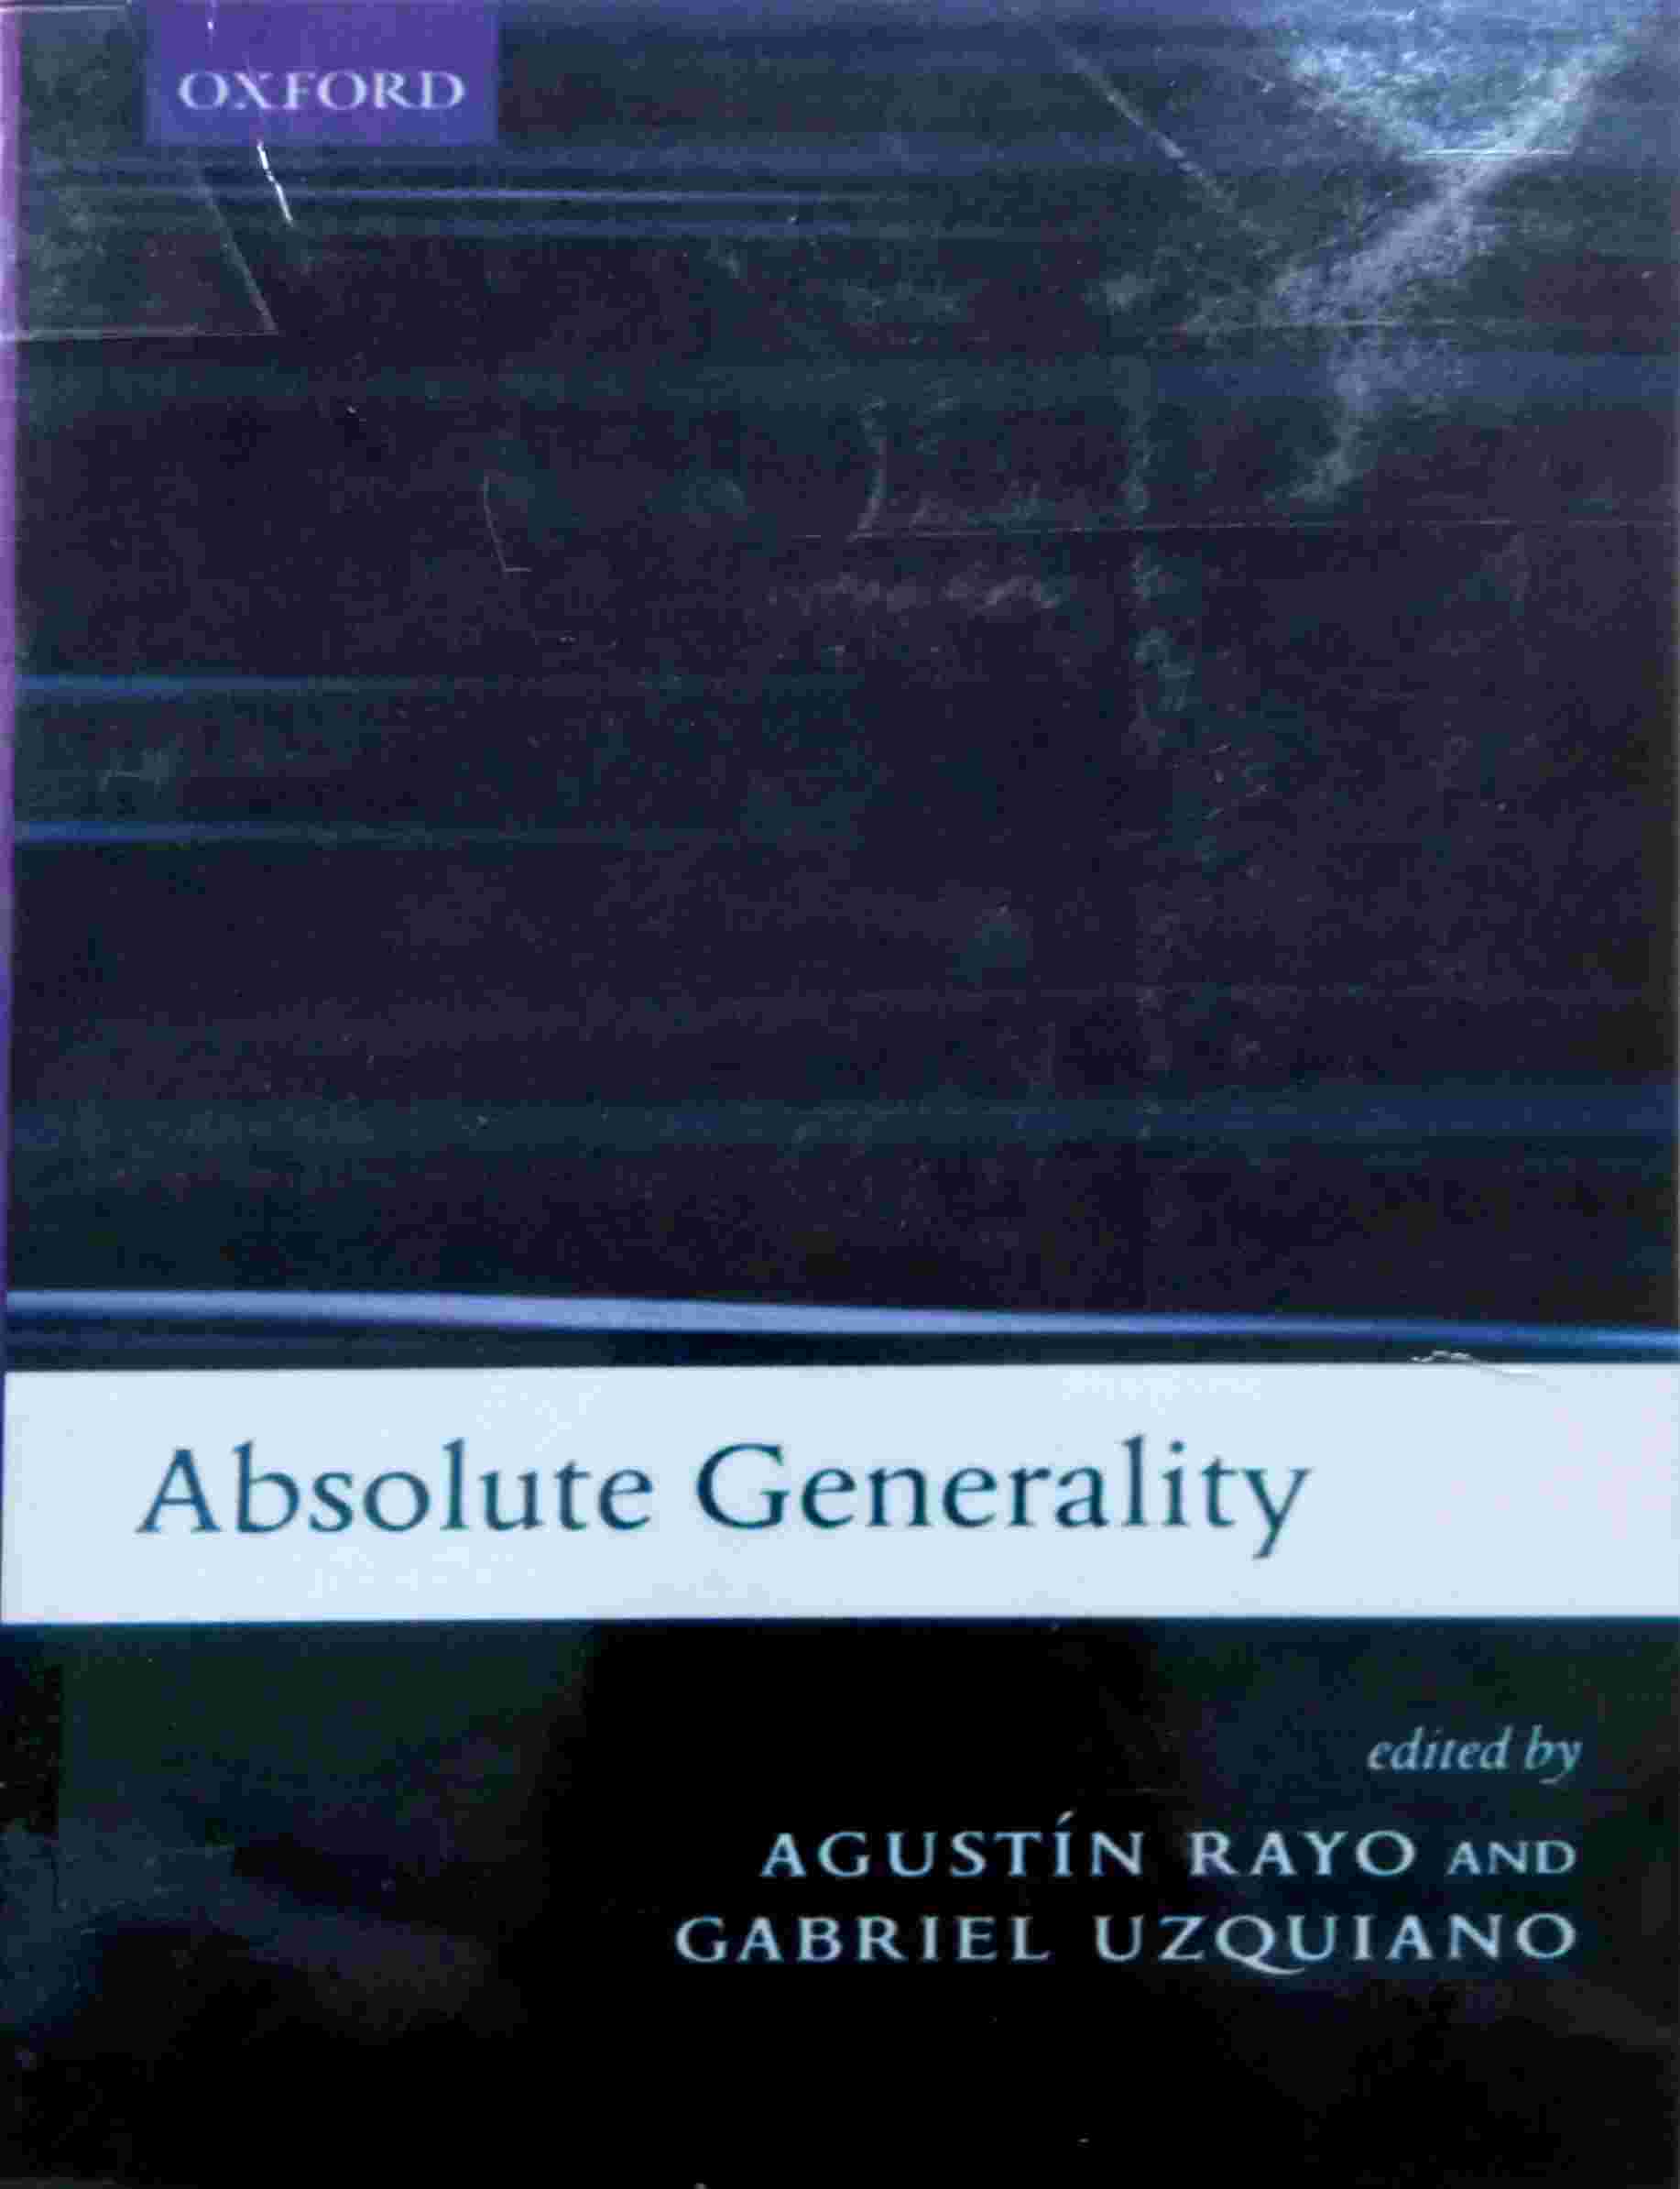 ABSOLUTE GENERALITY